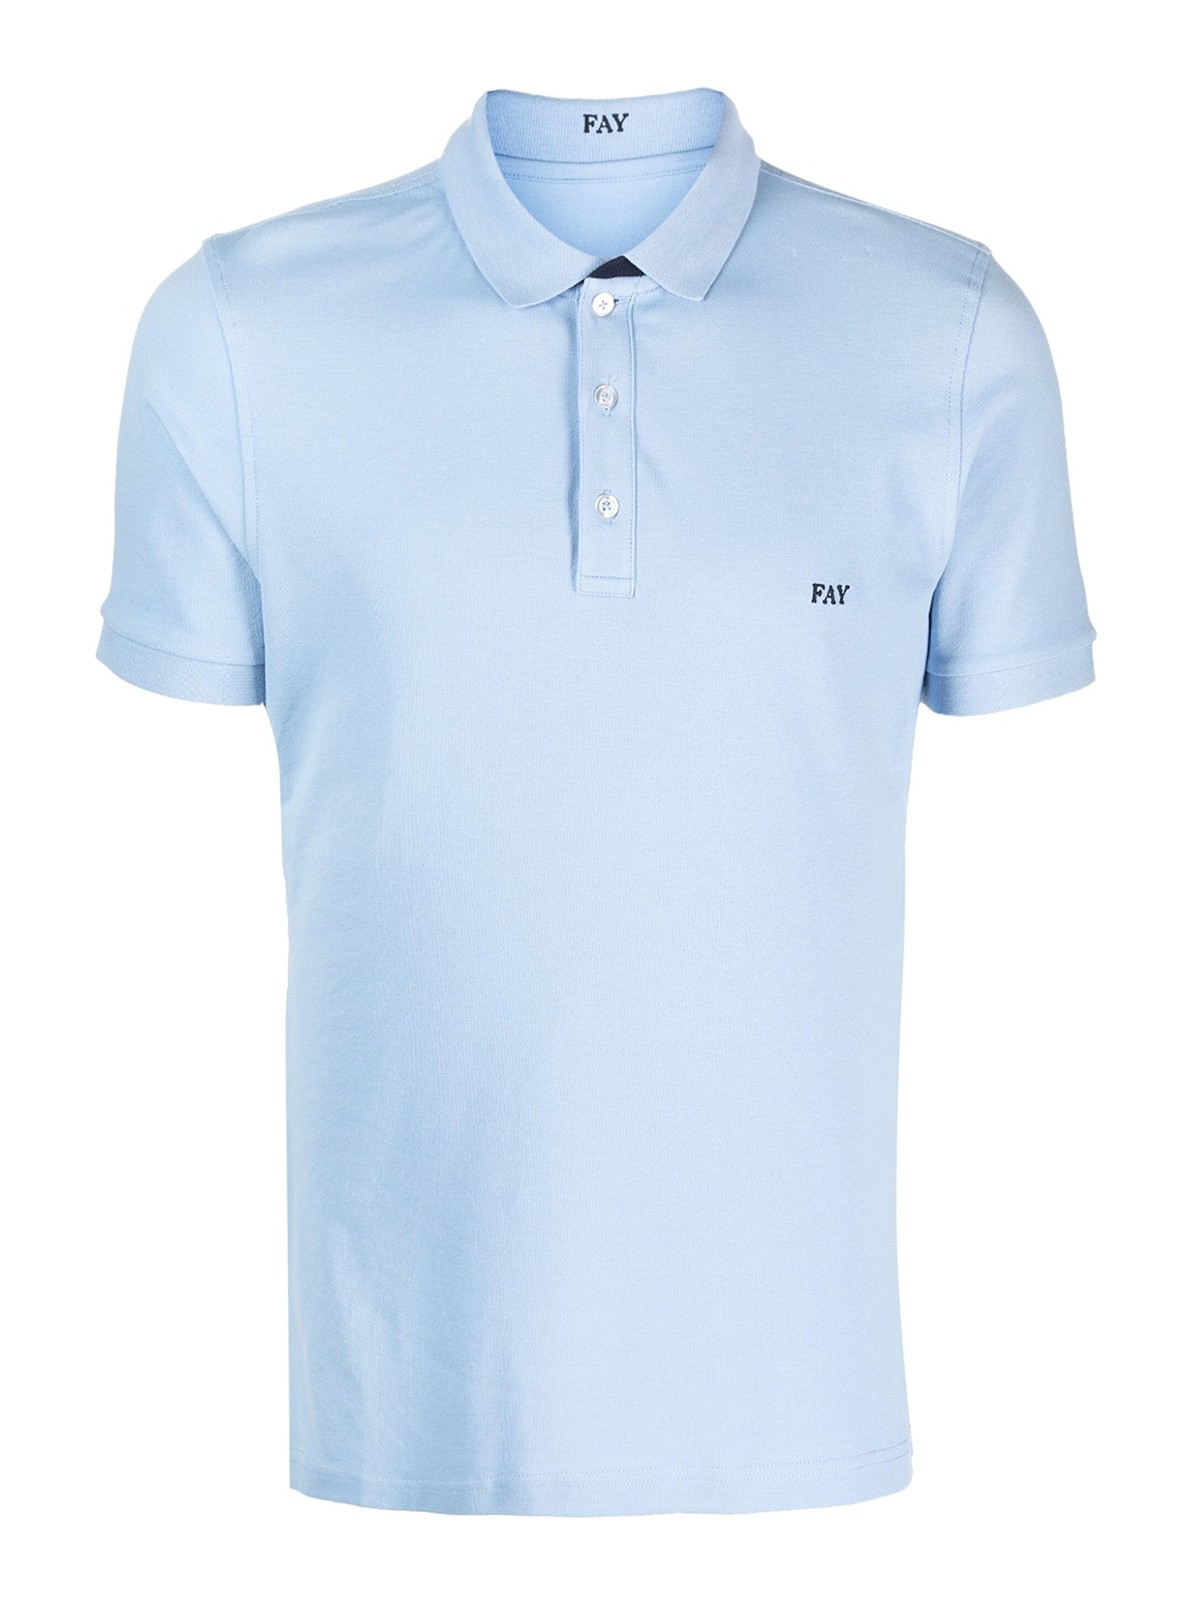 Fay Cotton Polo Shirt In Light Blue